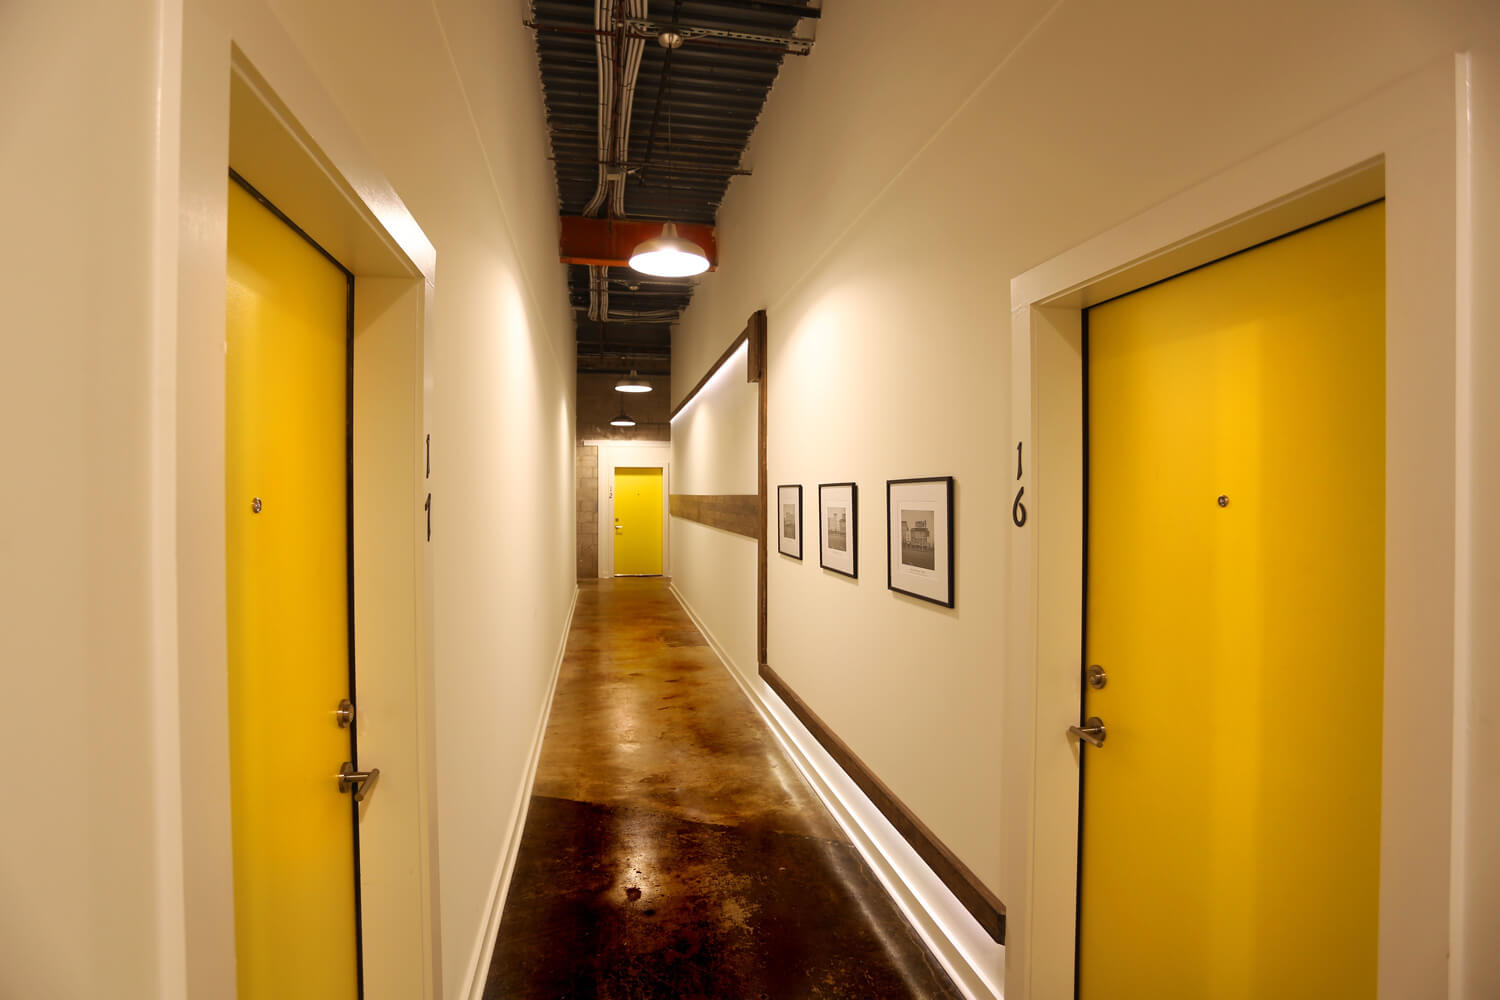 District 36 Lofts Designed by Foshee Architecture - View of Interior Hallway for Apartments